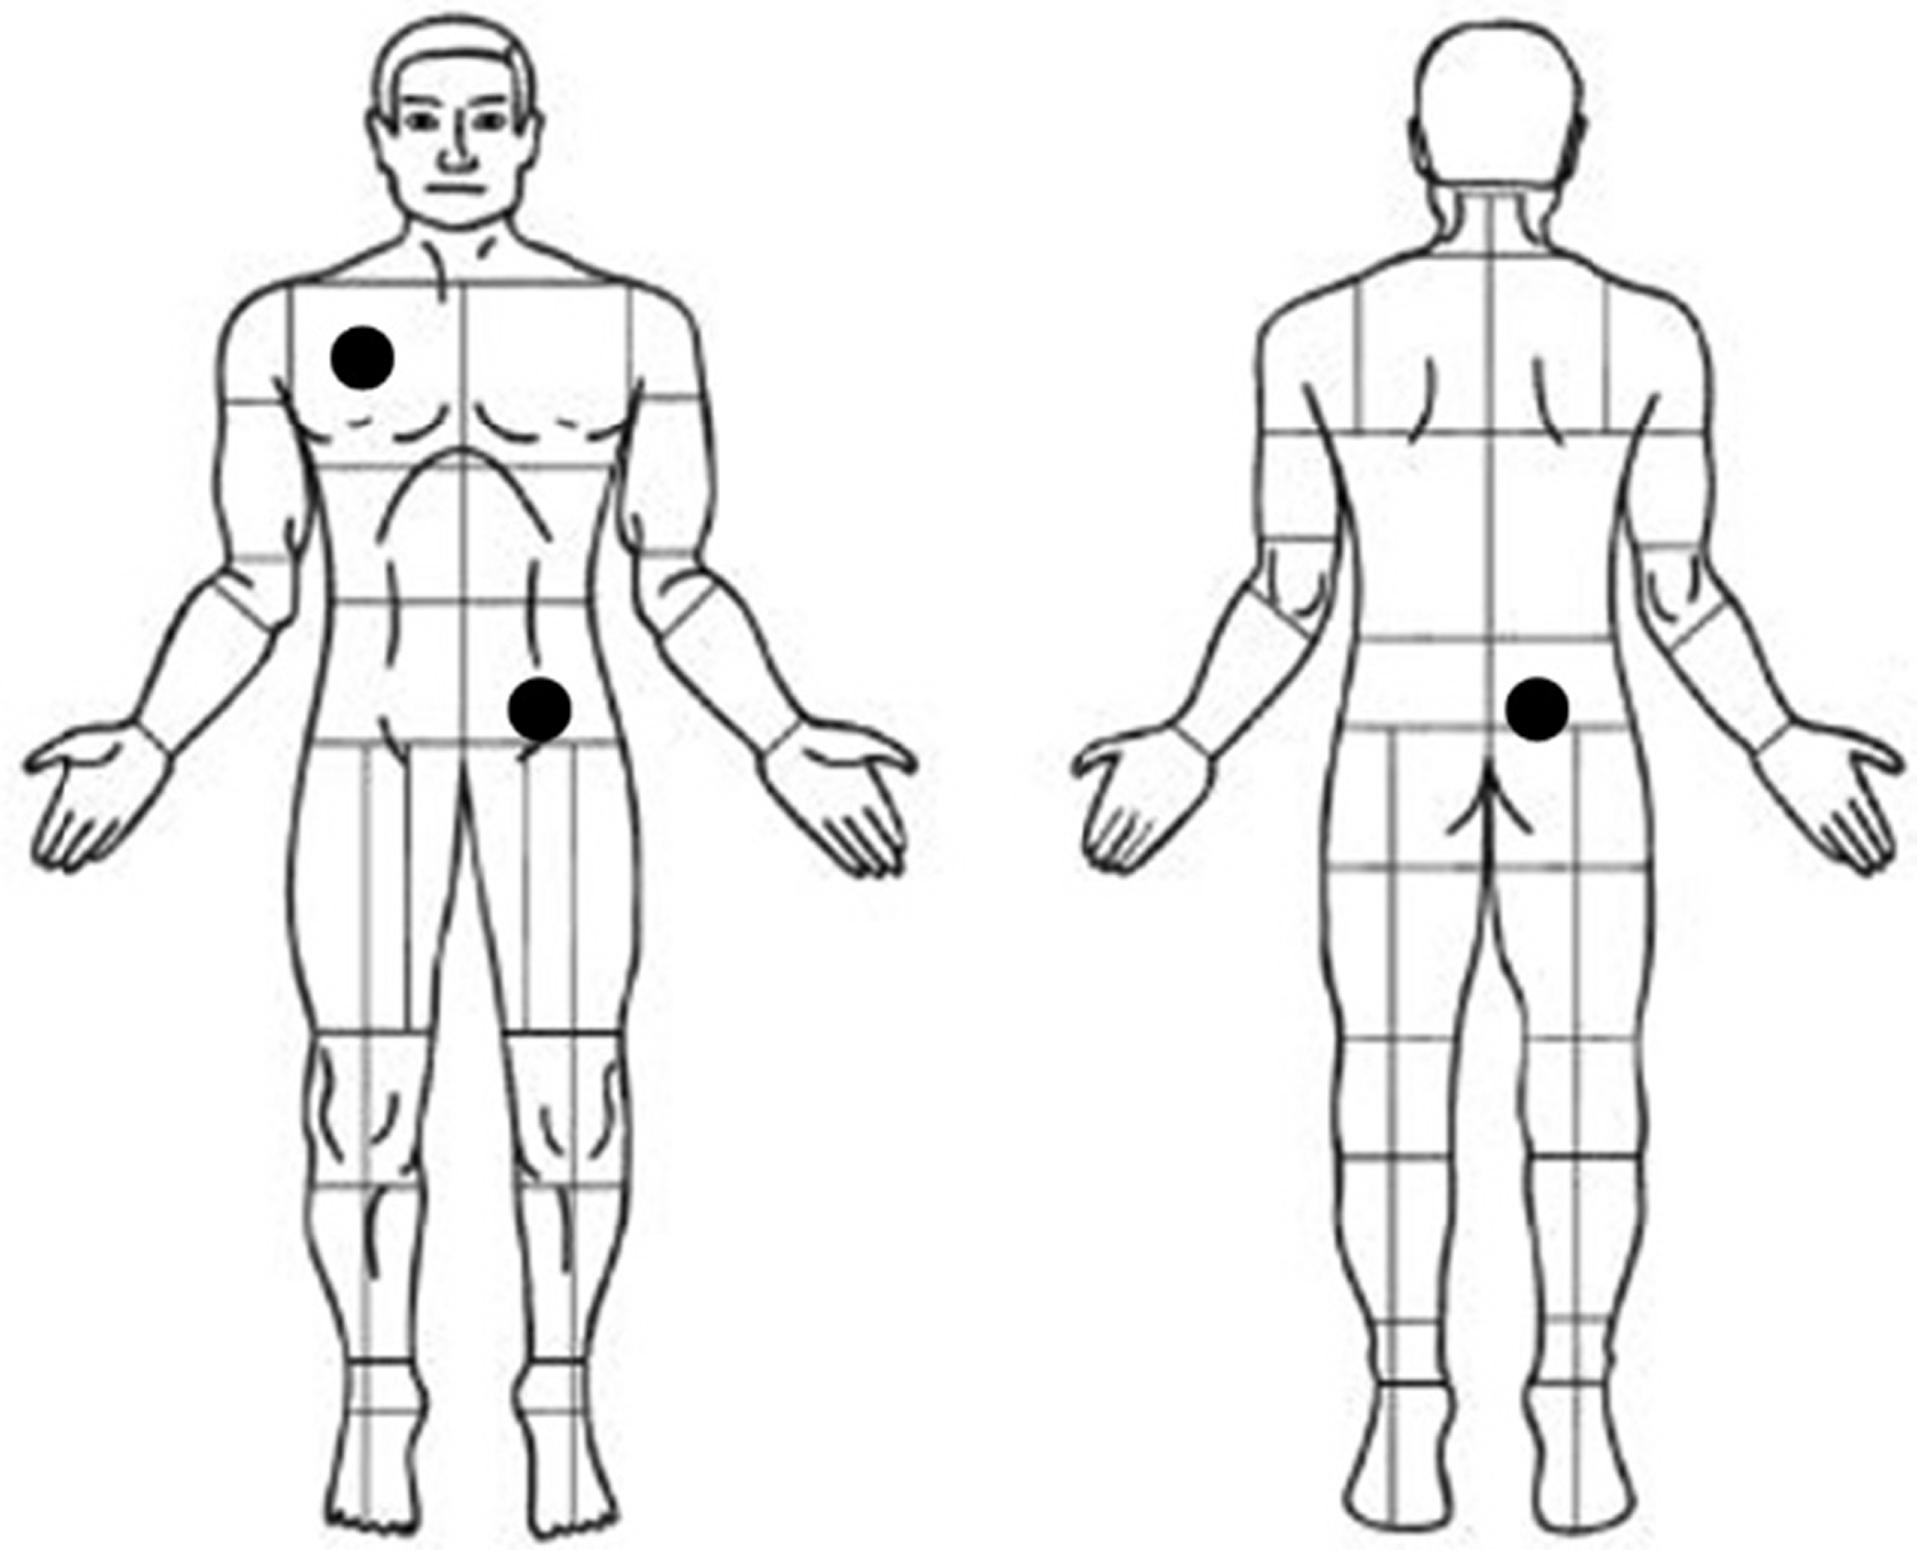 Figure 8.2, Typical device implant locations are indicated by black dots and include the subclavicular region, the lower abdomen, and the upper buttocks.